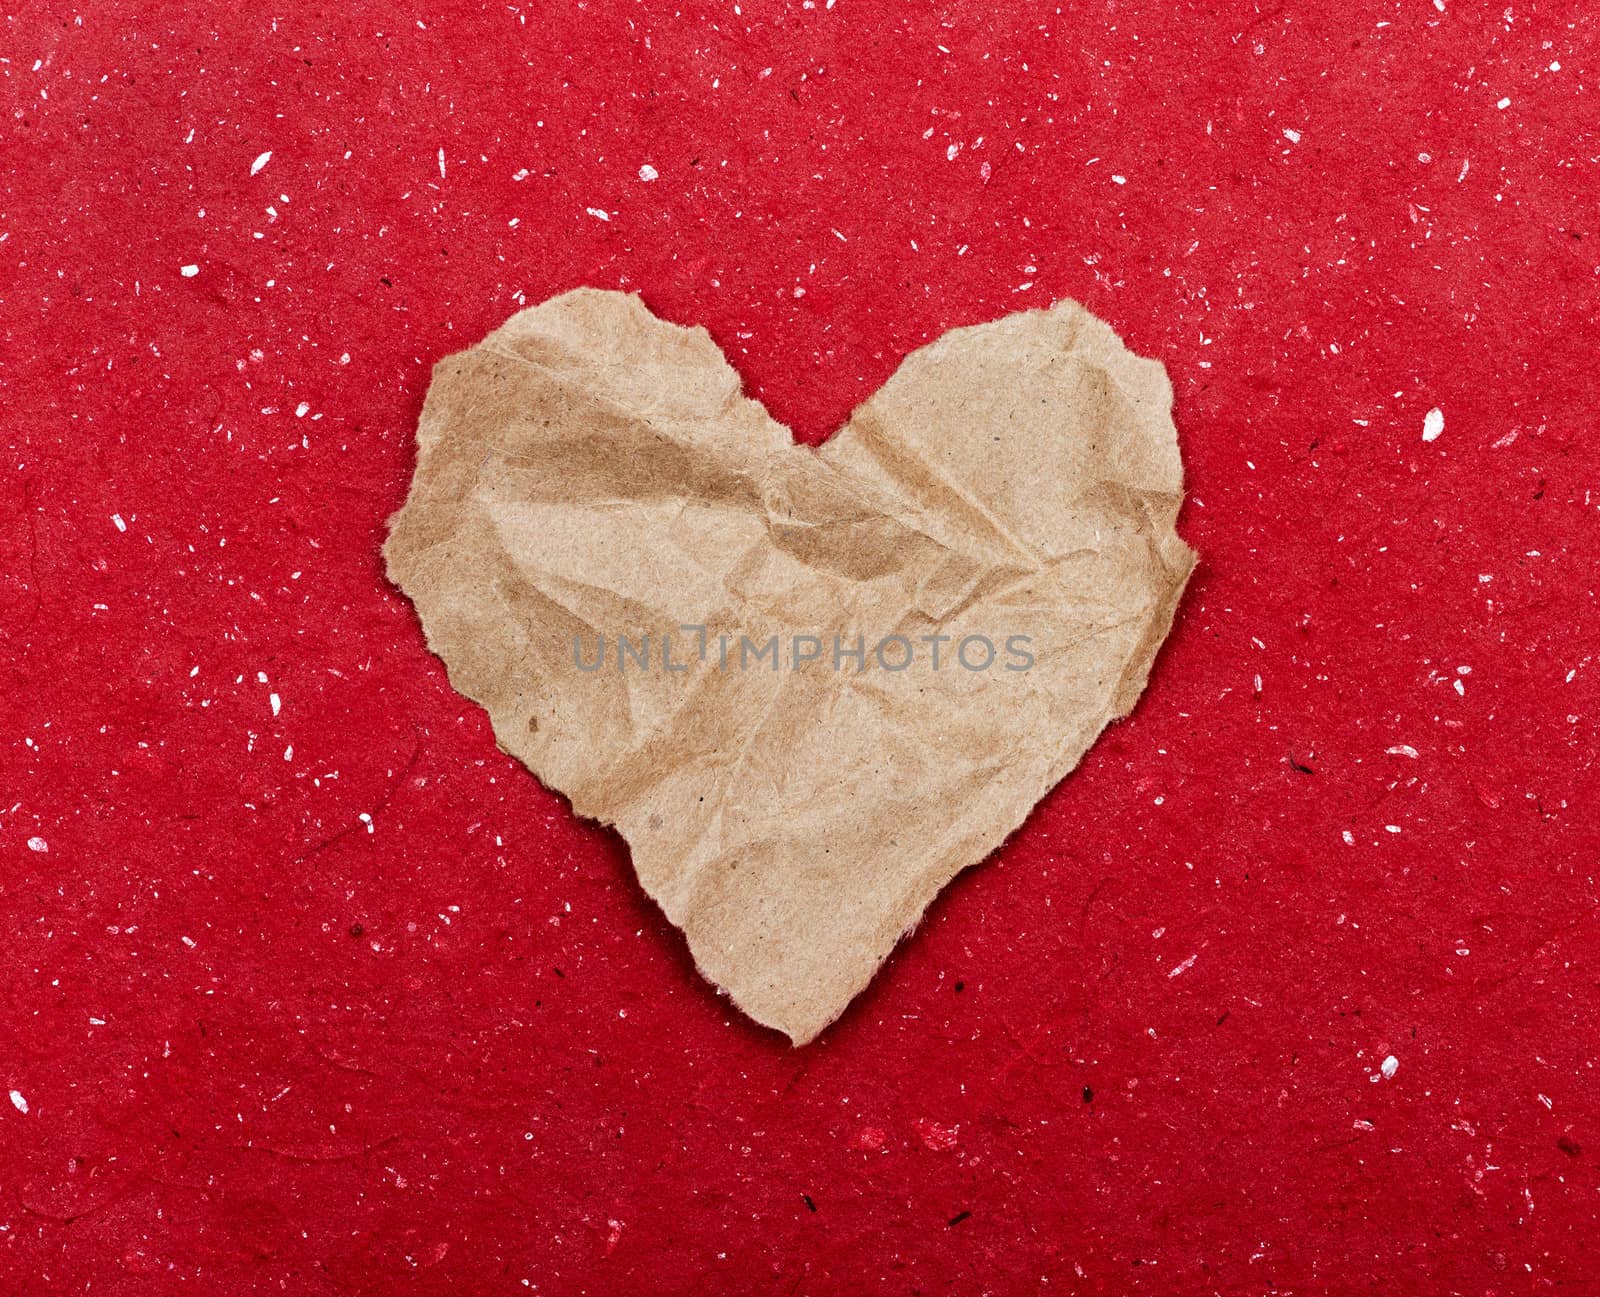 Torn paper heart on a red background by DNKSTUDIO